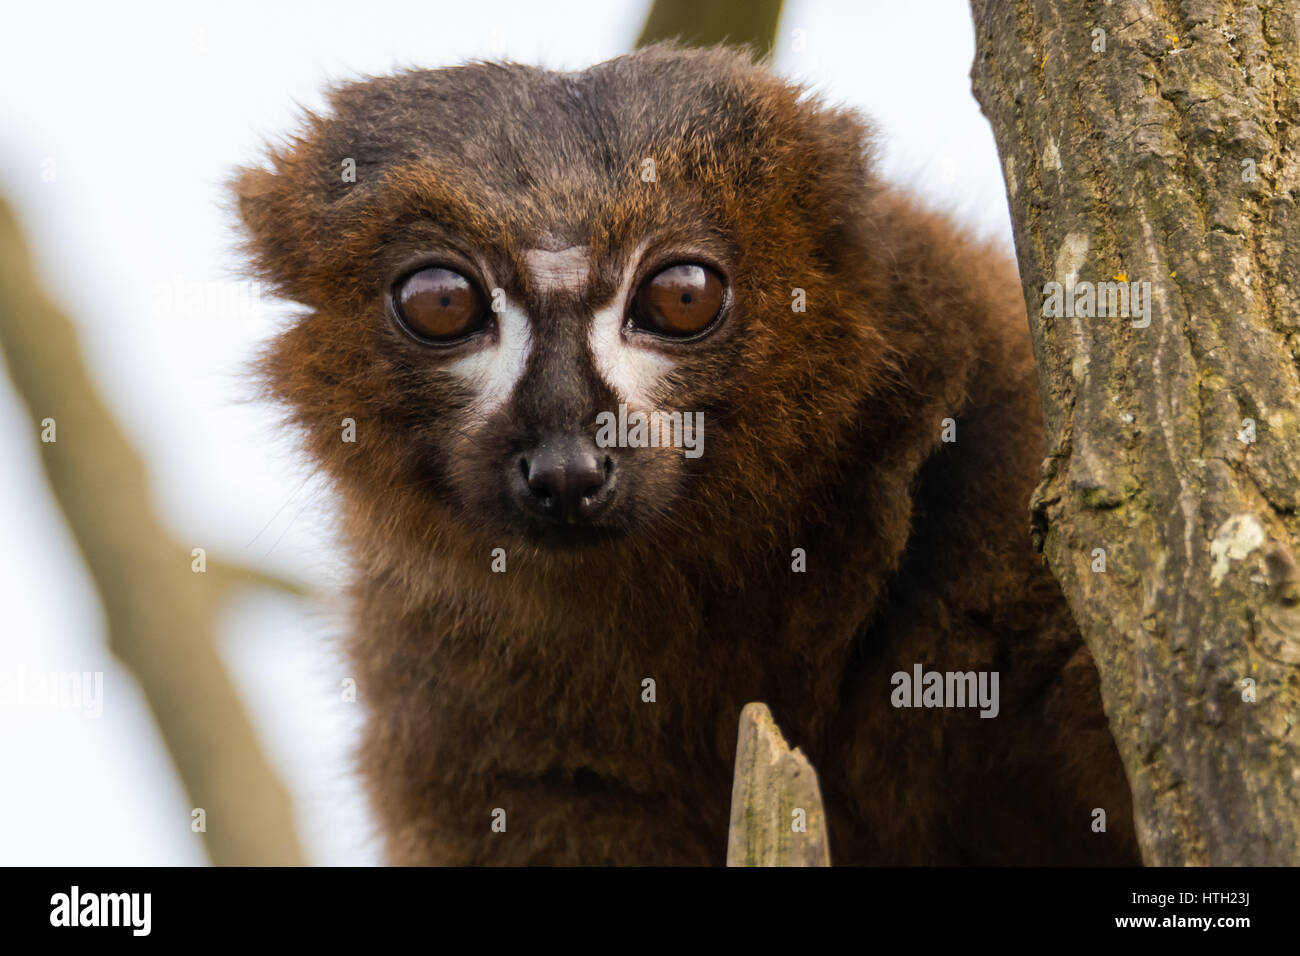 Red-bellied lemur (Eulemur rubriventer). Male arboreal primate in the Lemuridae family, native to rainforest in Madagascar Stock Photo